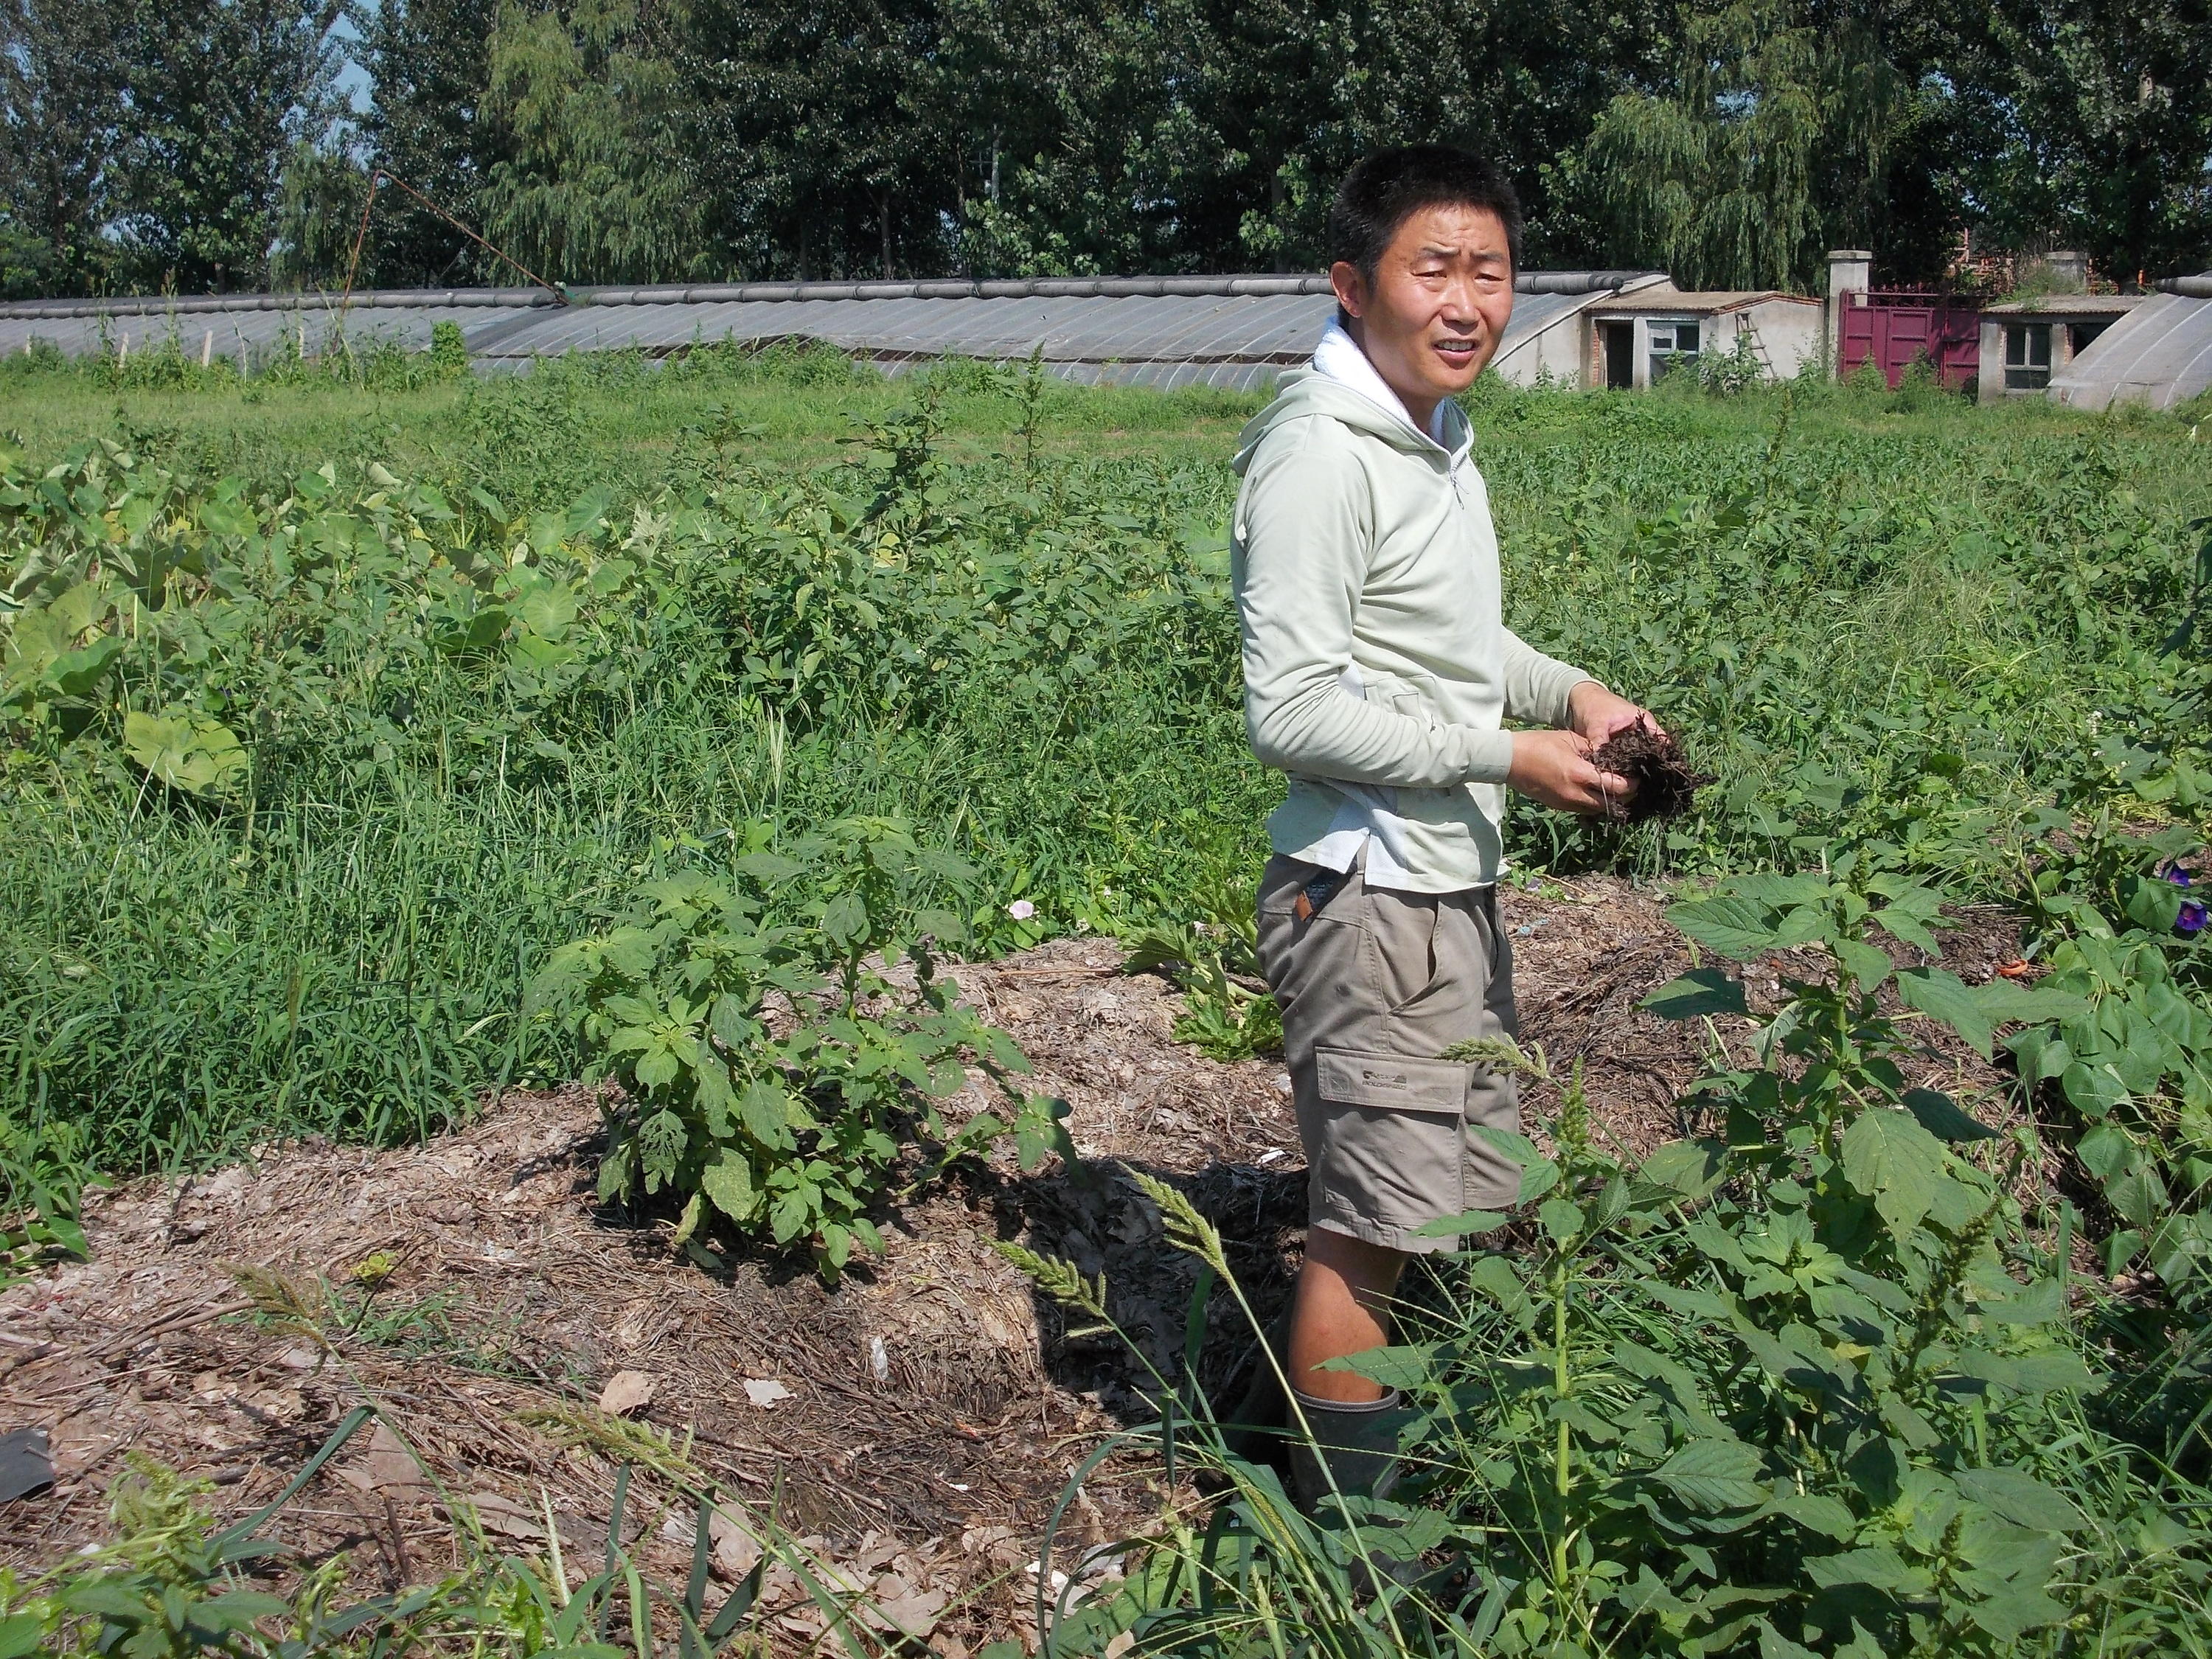 Liu Gang, owner of the Little Willow Farm, shows the compost on the farm